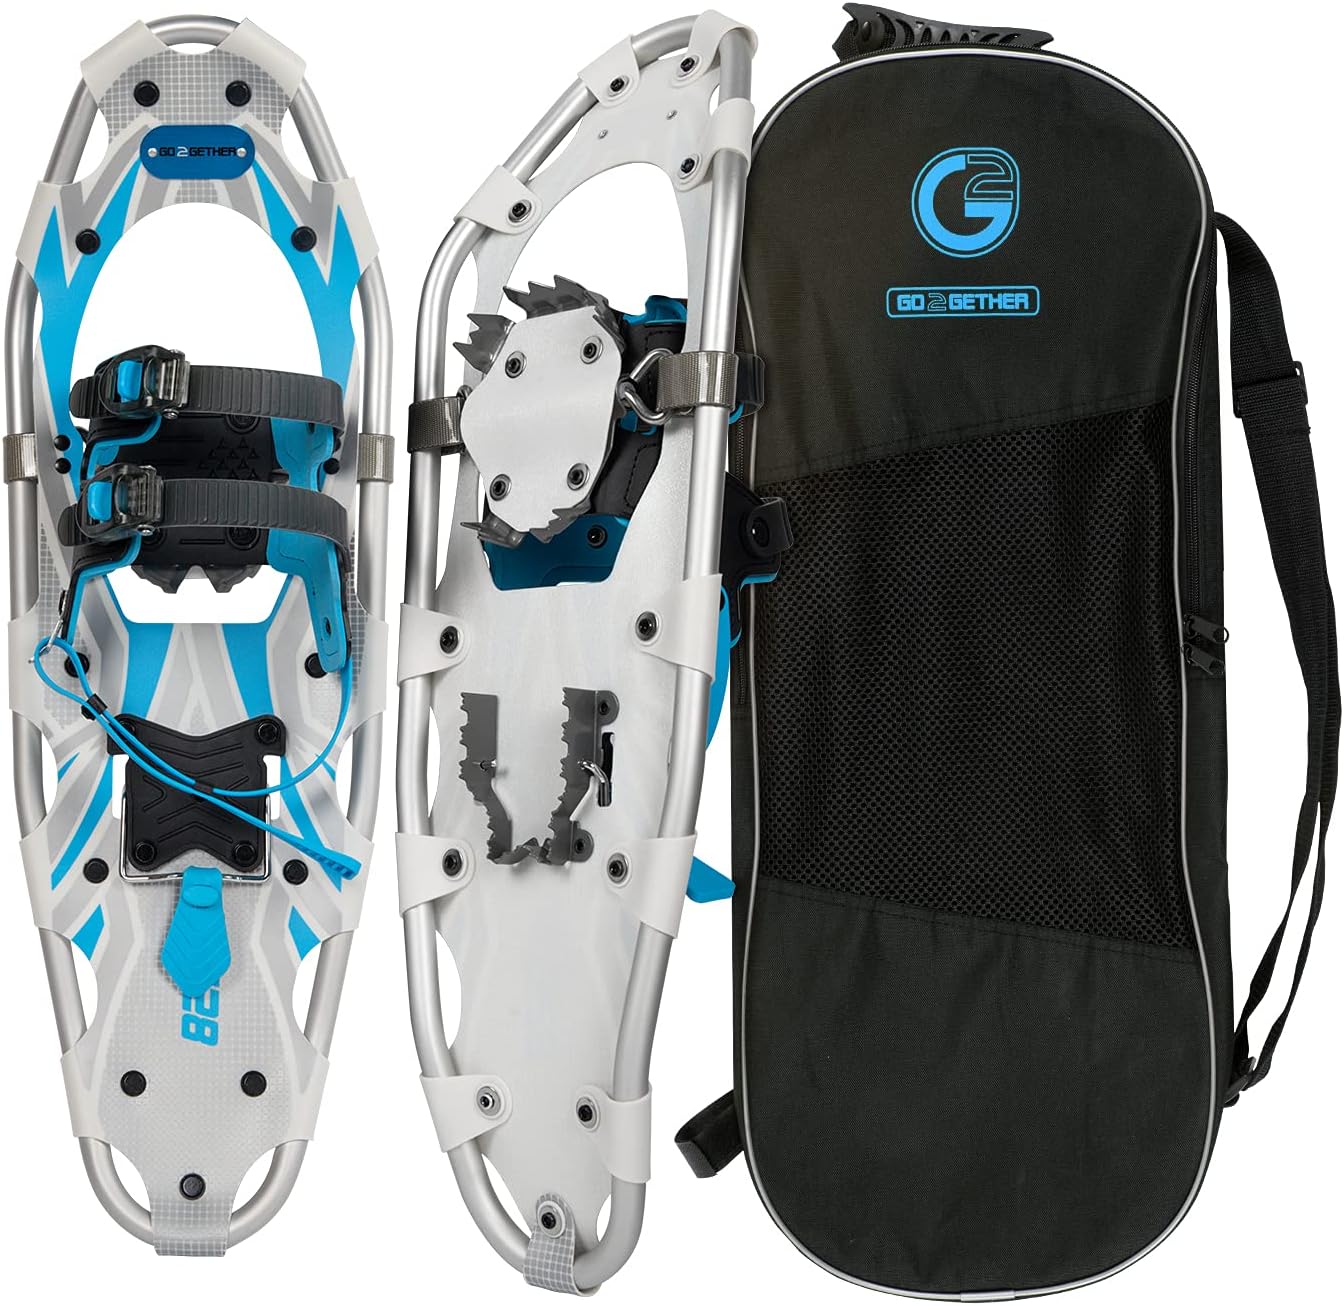 G2 21/25/30 Inches Light Weight Snowshoes for Women [...]